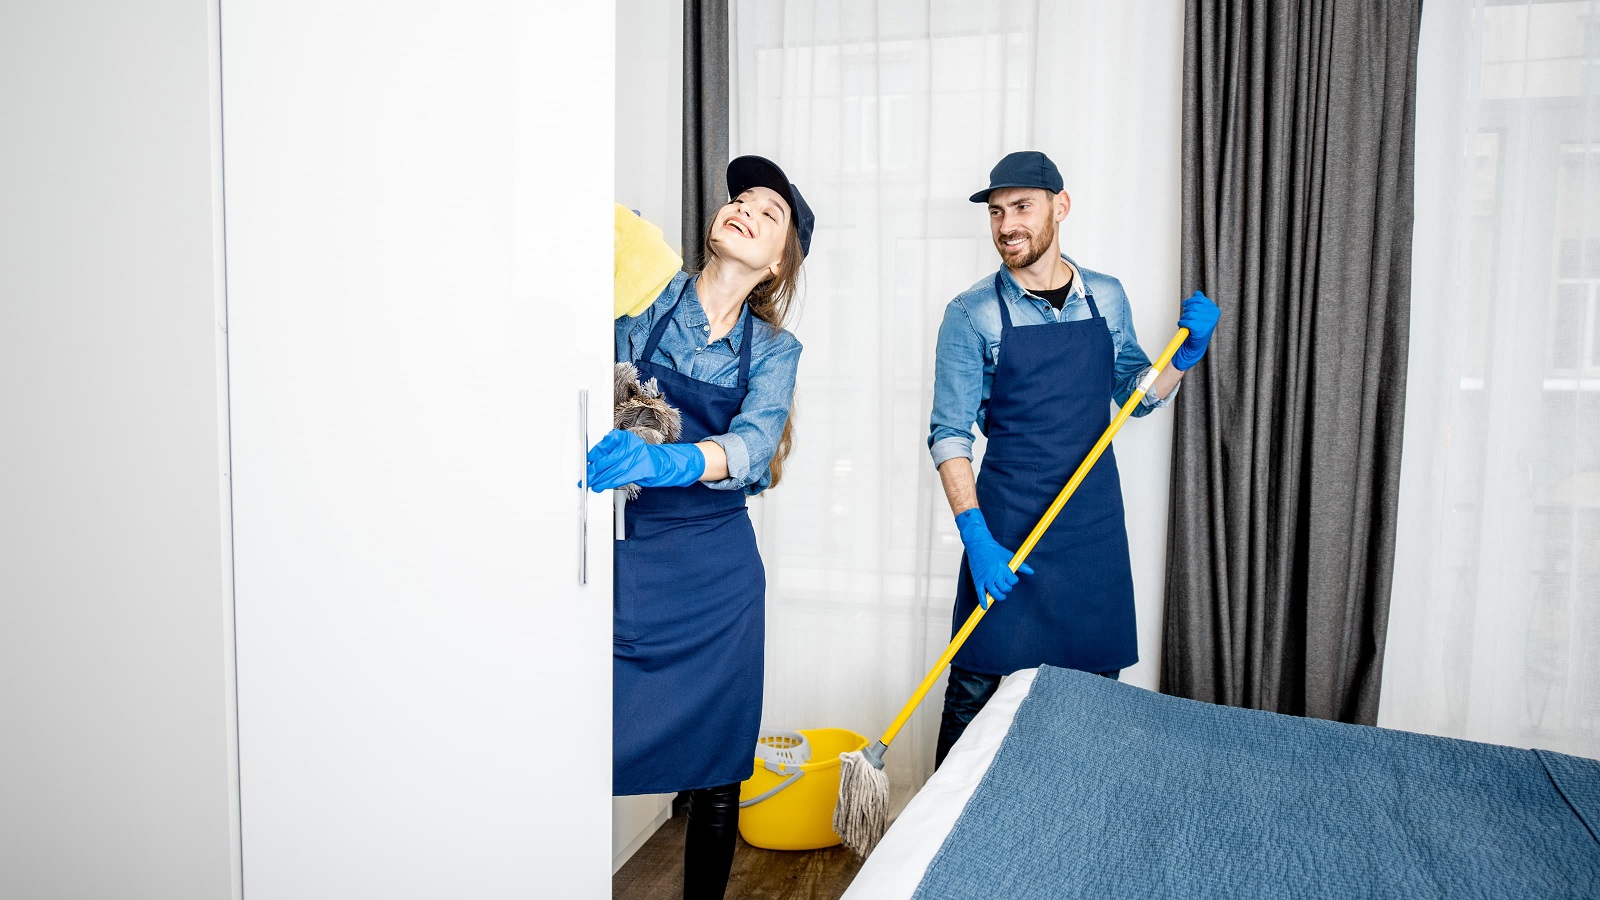 Building Relationships With Housekeepers